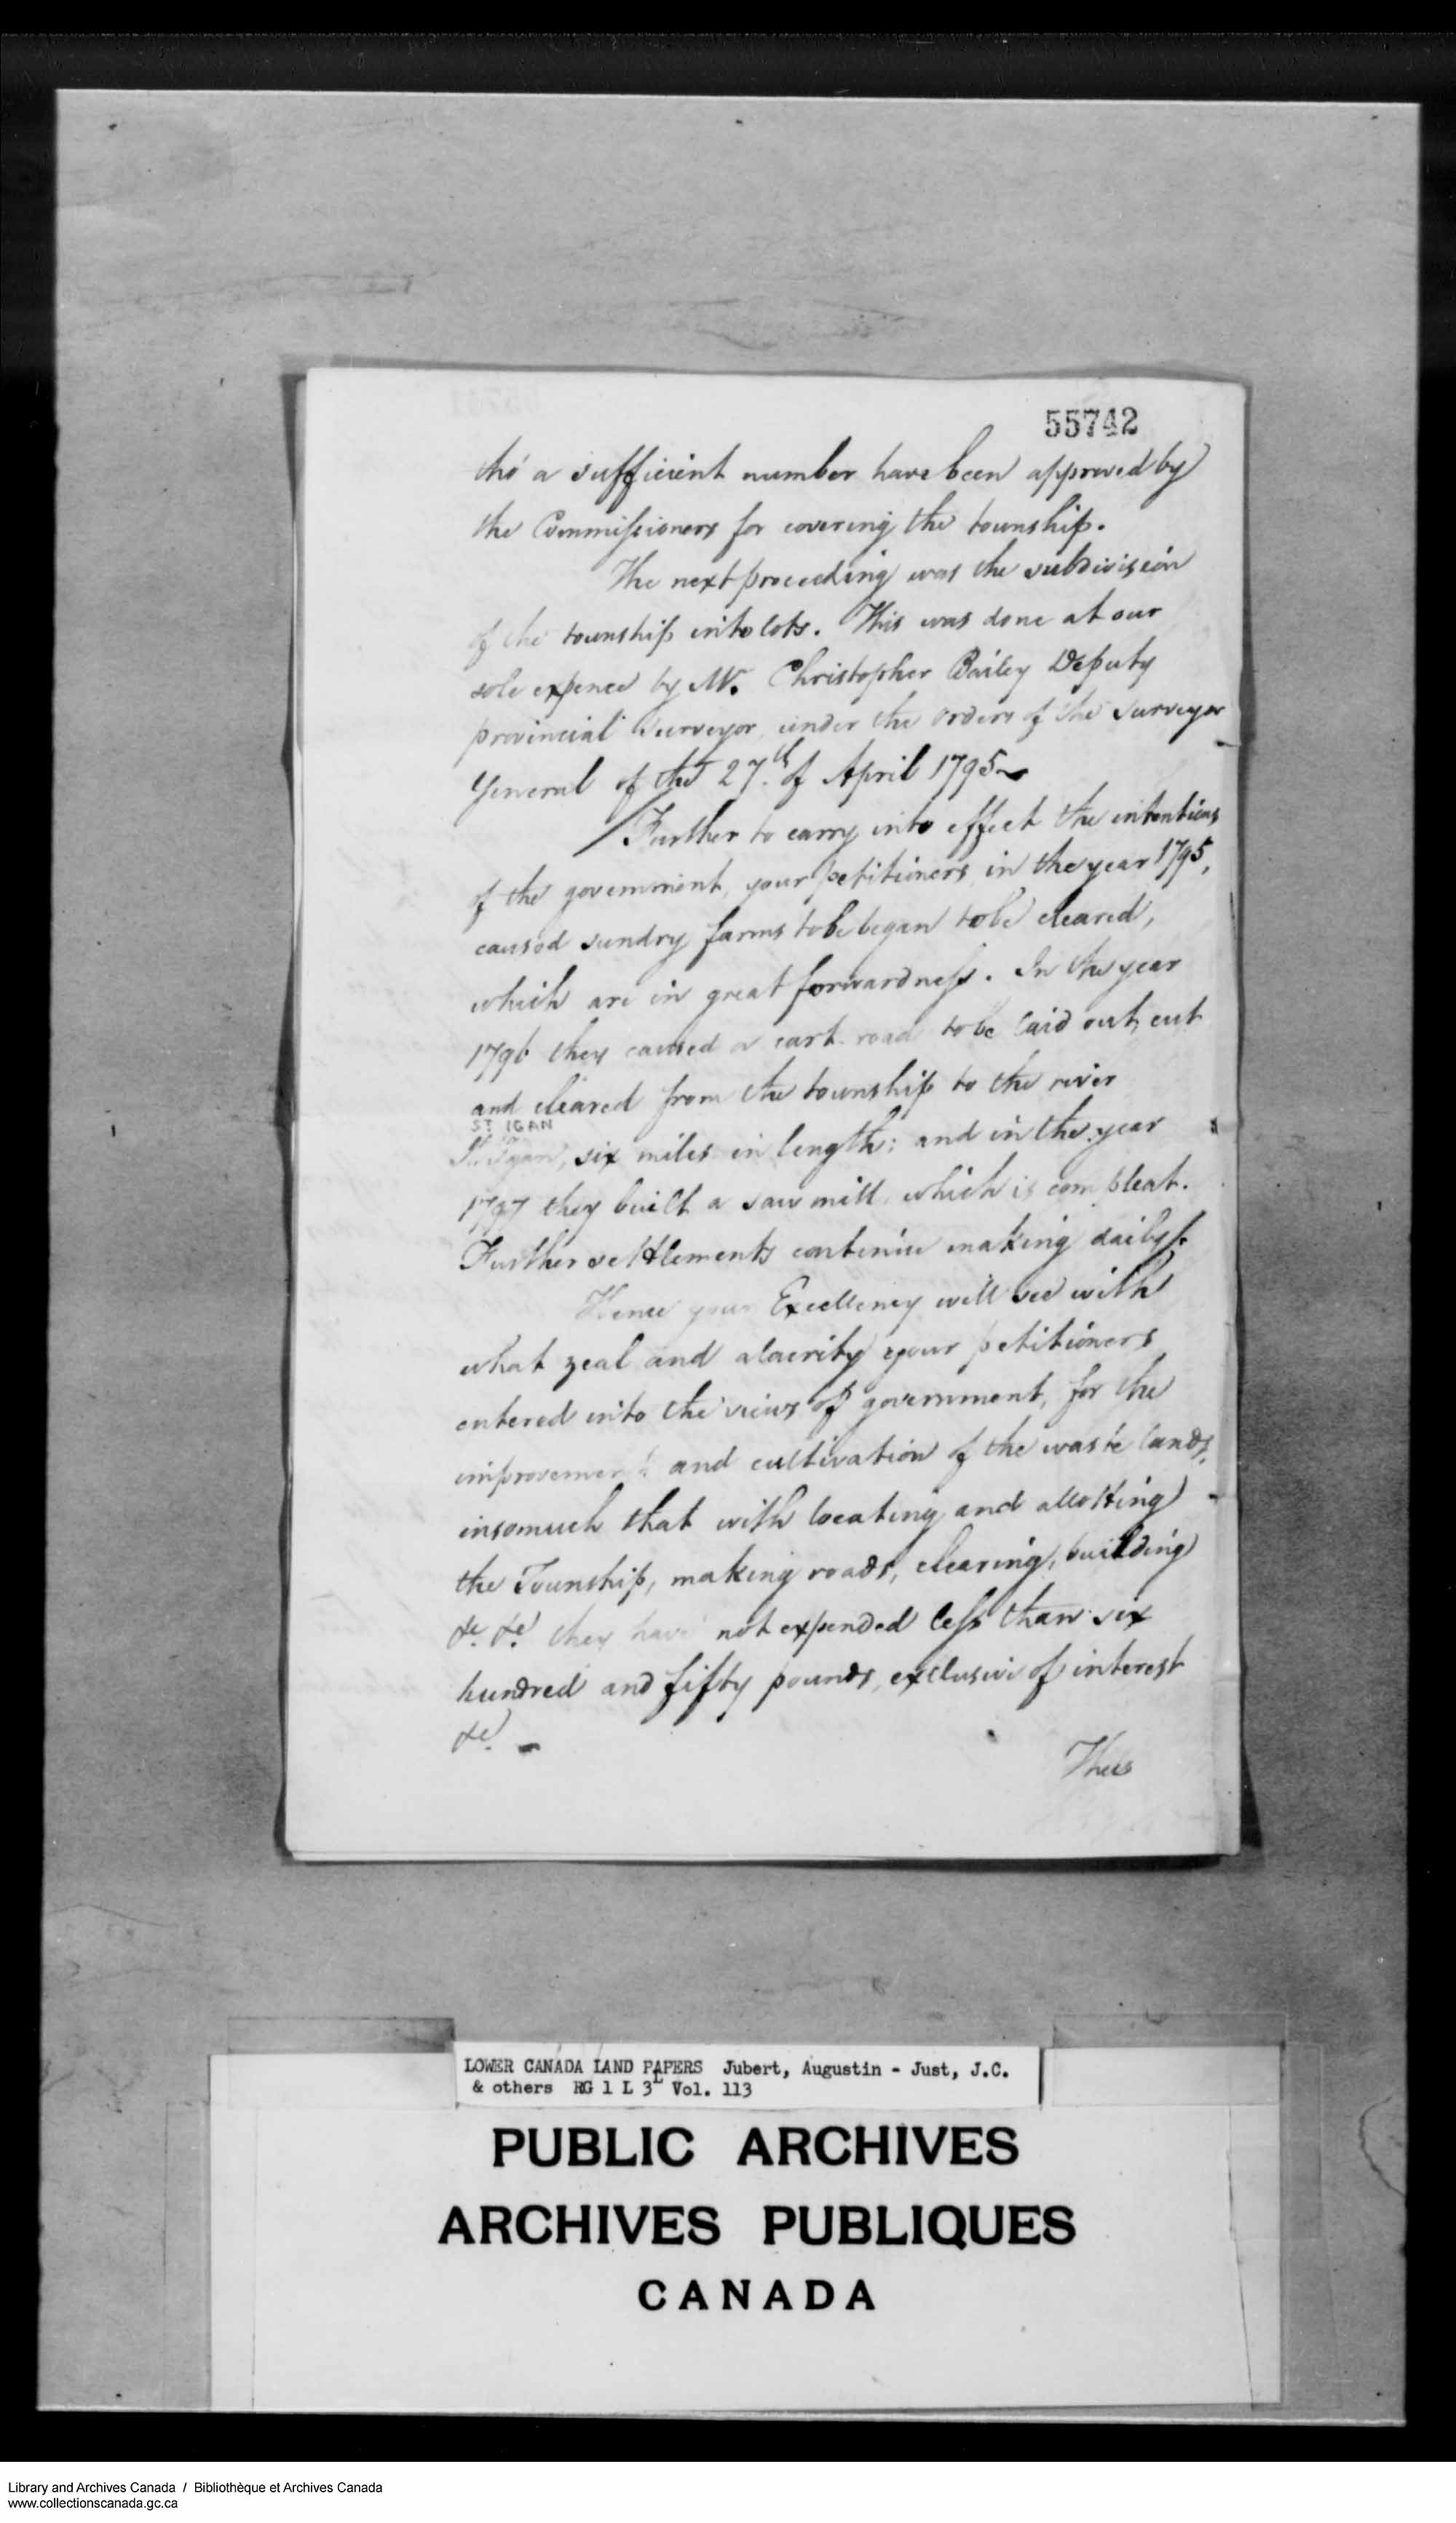 Digitized page of  for Image No.: e008700230